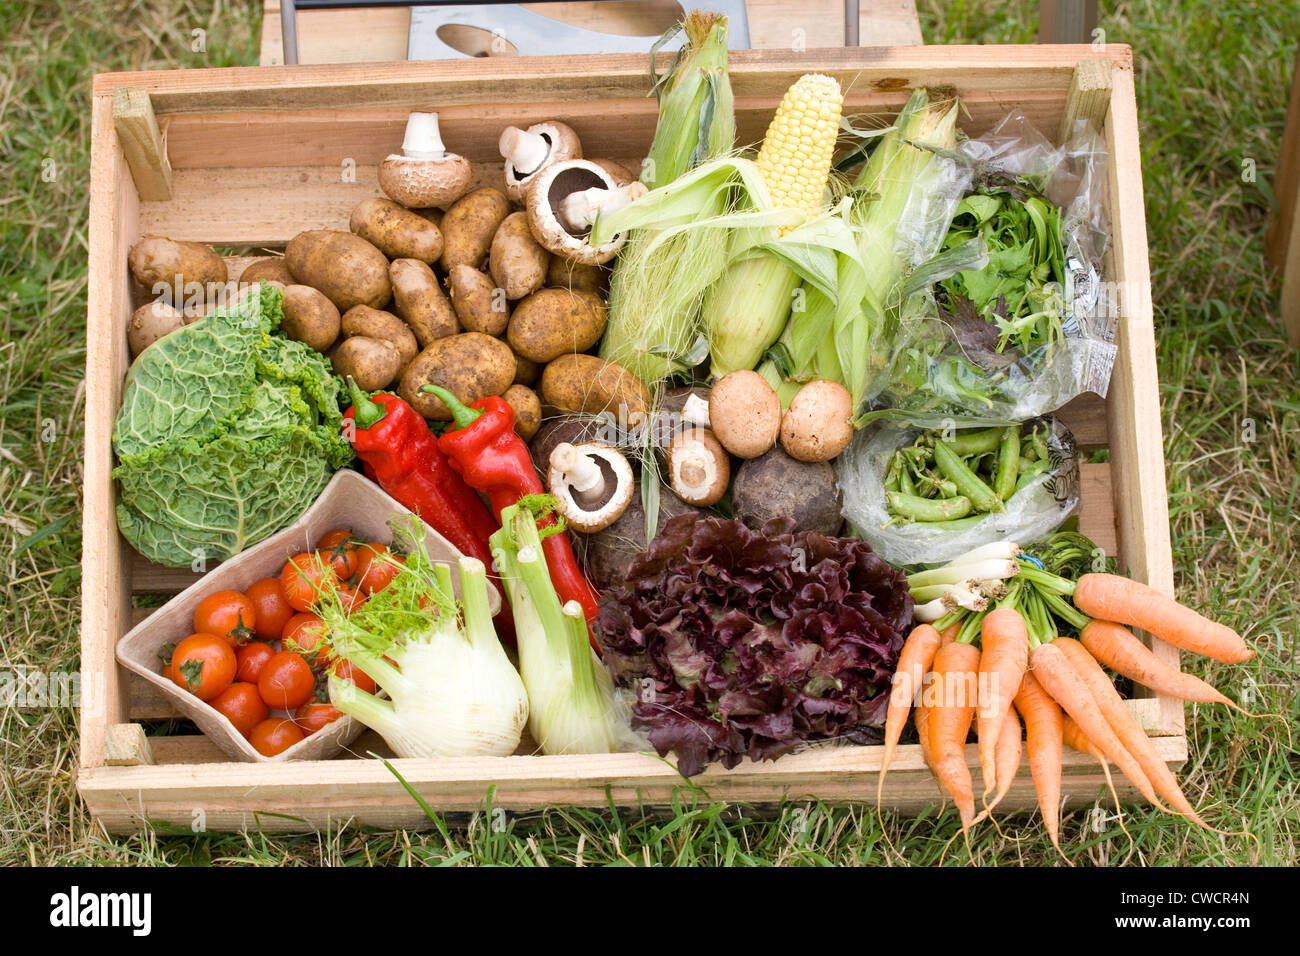 Box of healthy organic vegetables Stock Photo